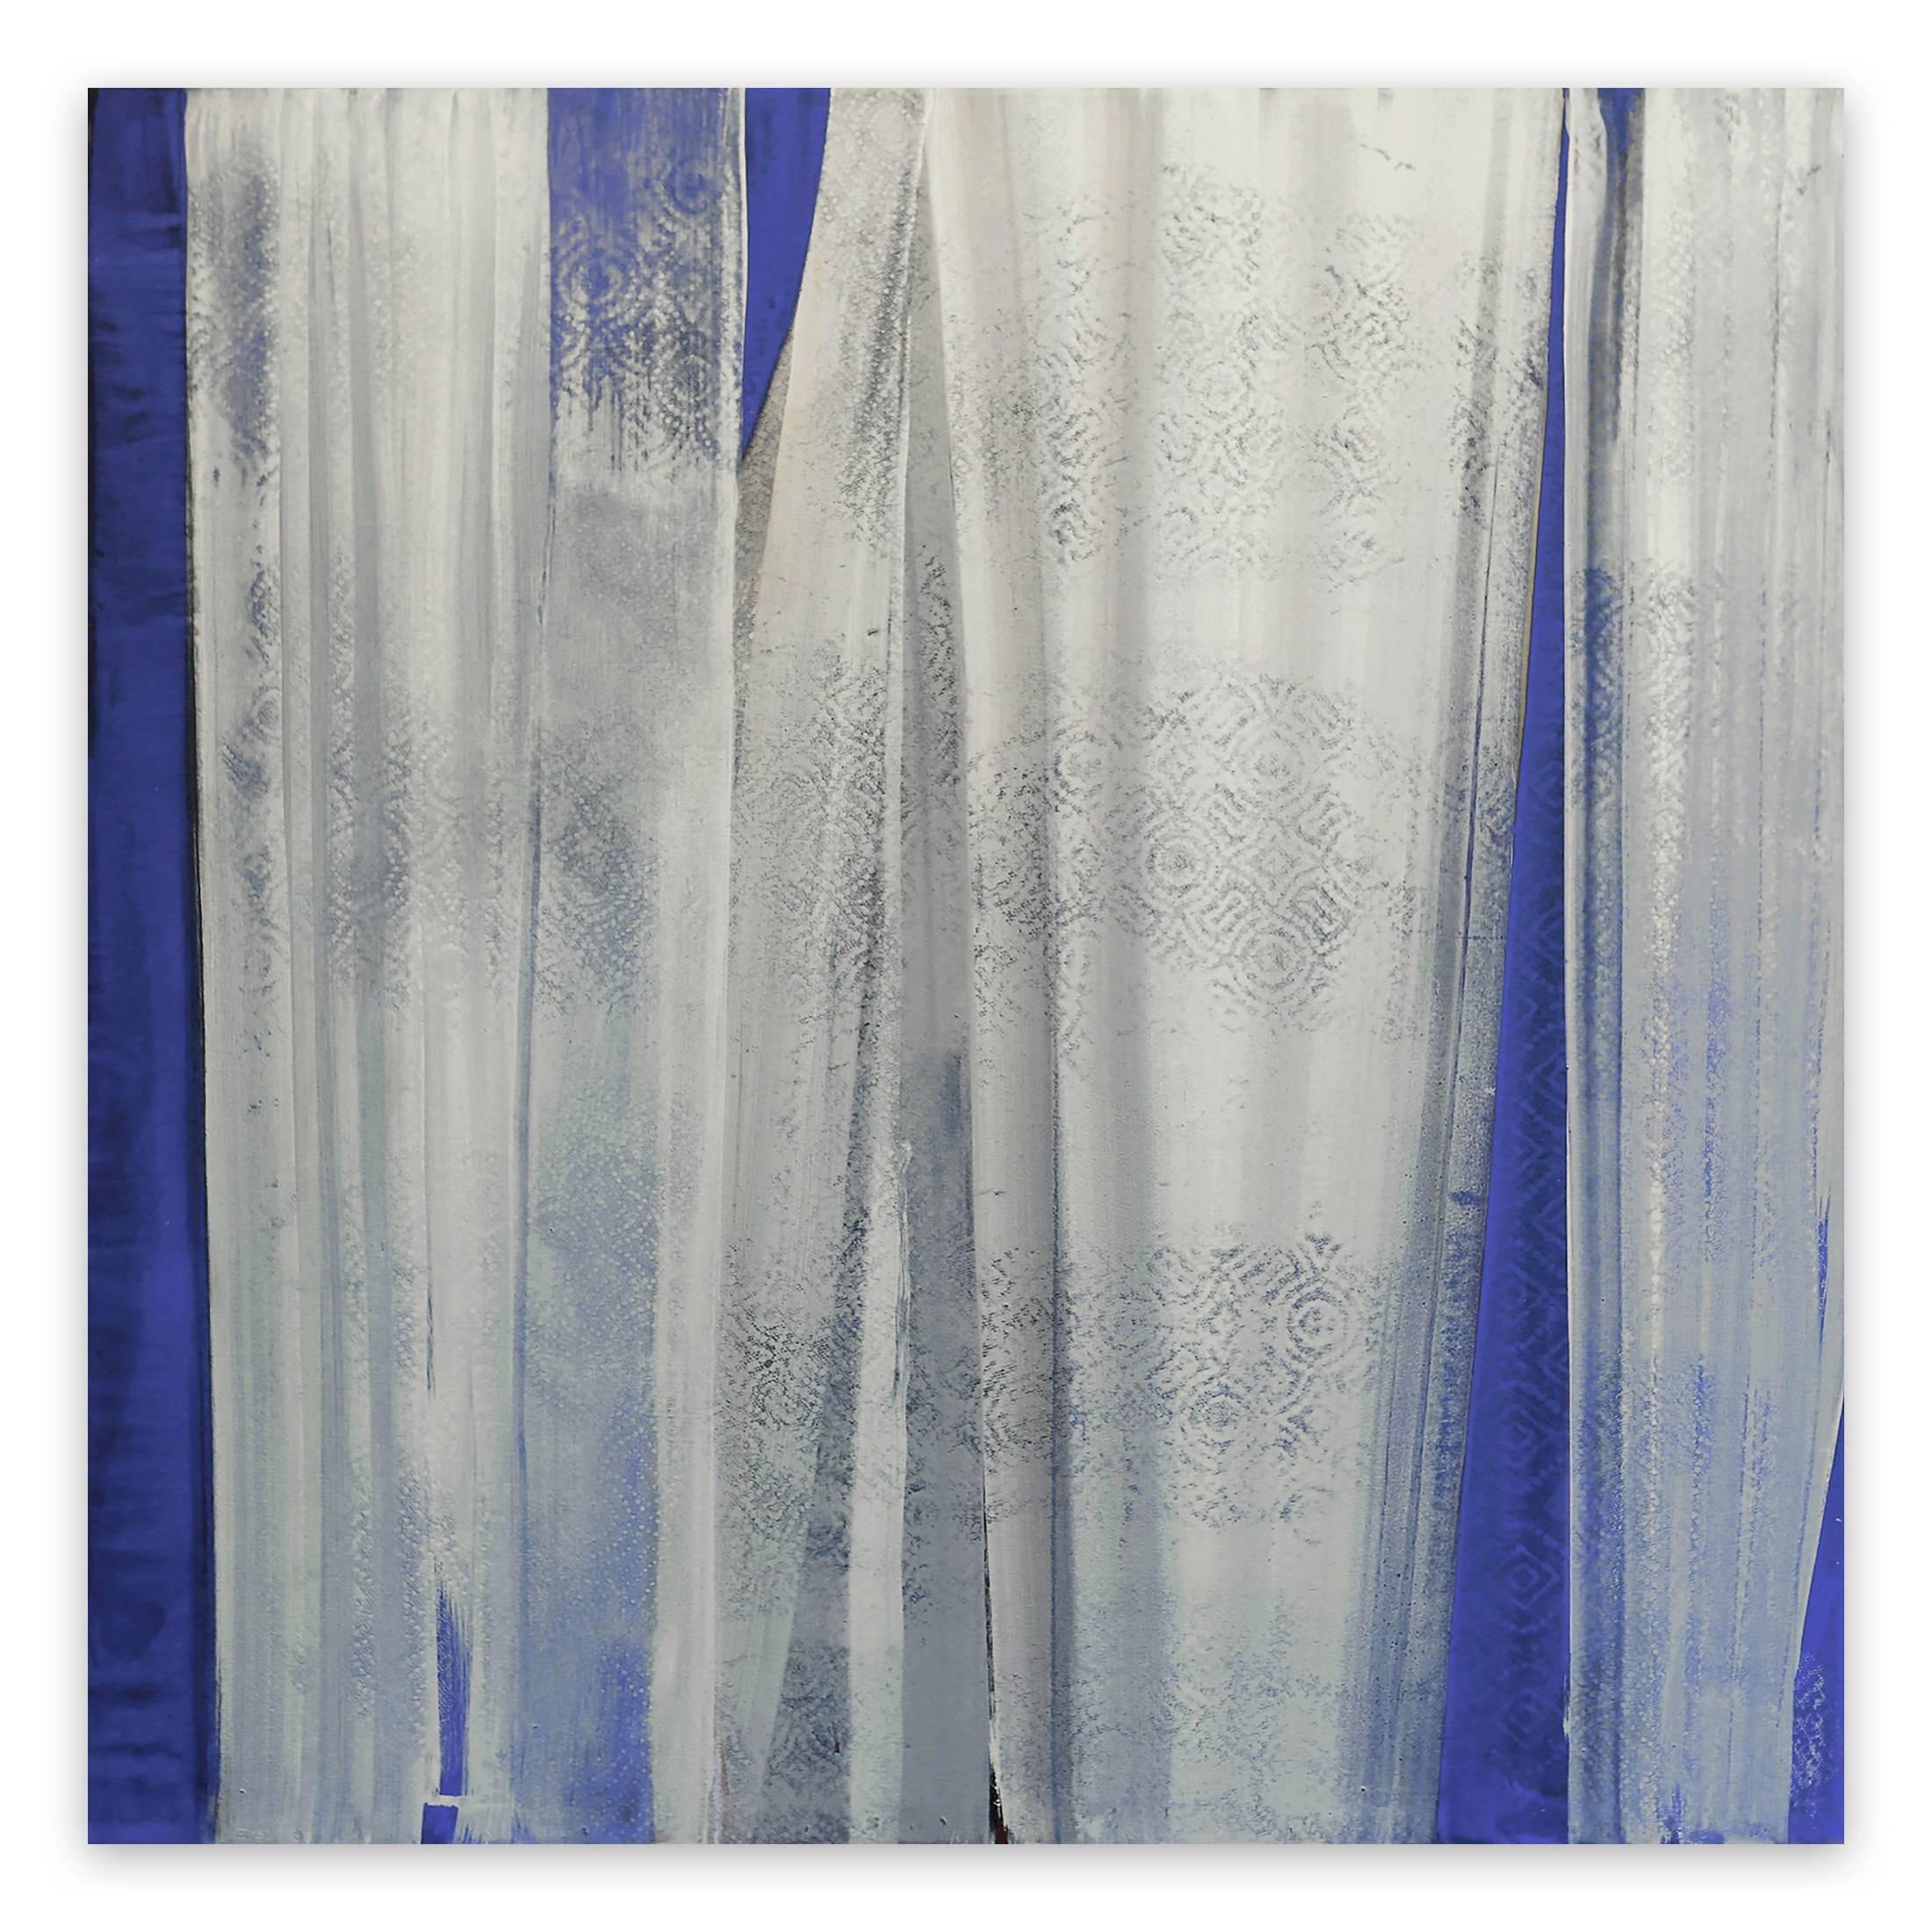 Blue View (Abstract Painting)

Acrylic on canvas - Unframed

The textured appearance of her paintings emanates from the intervention of common household products such as paper towels during the painting process.

Marcy Rosenblat describes herself as